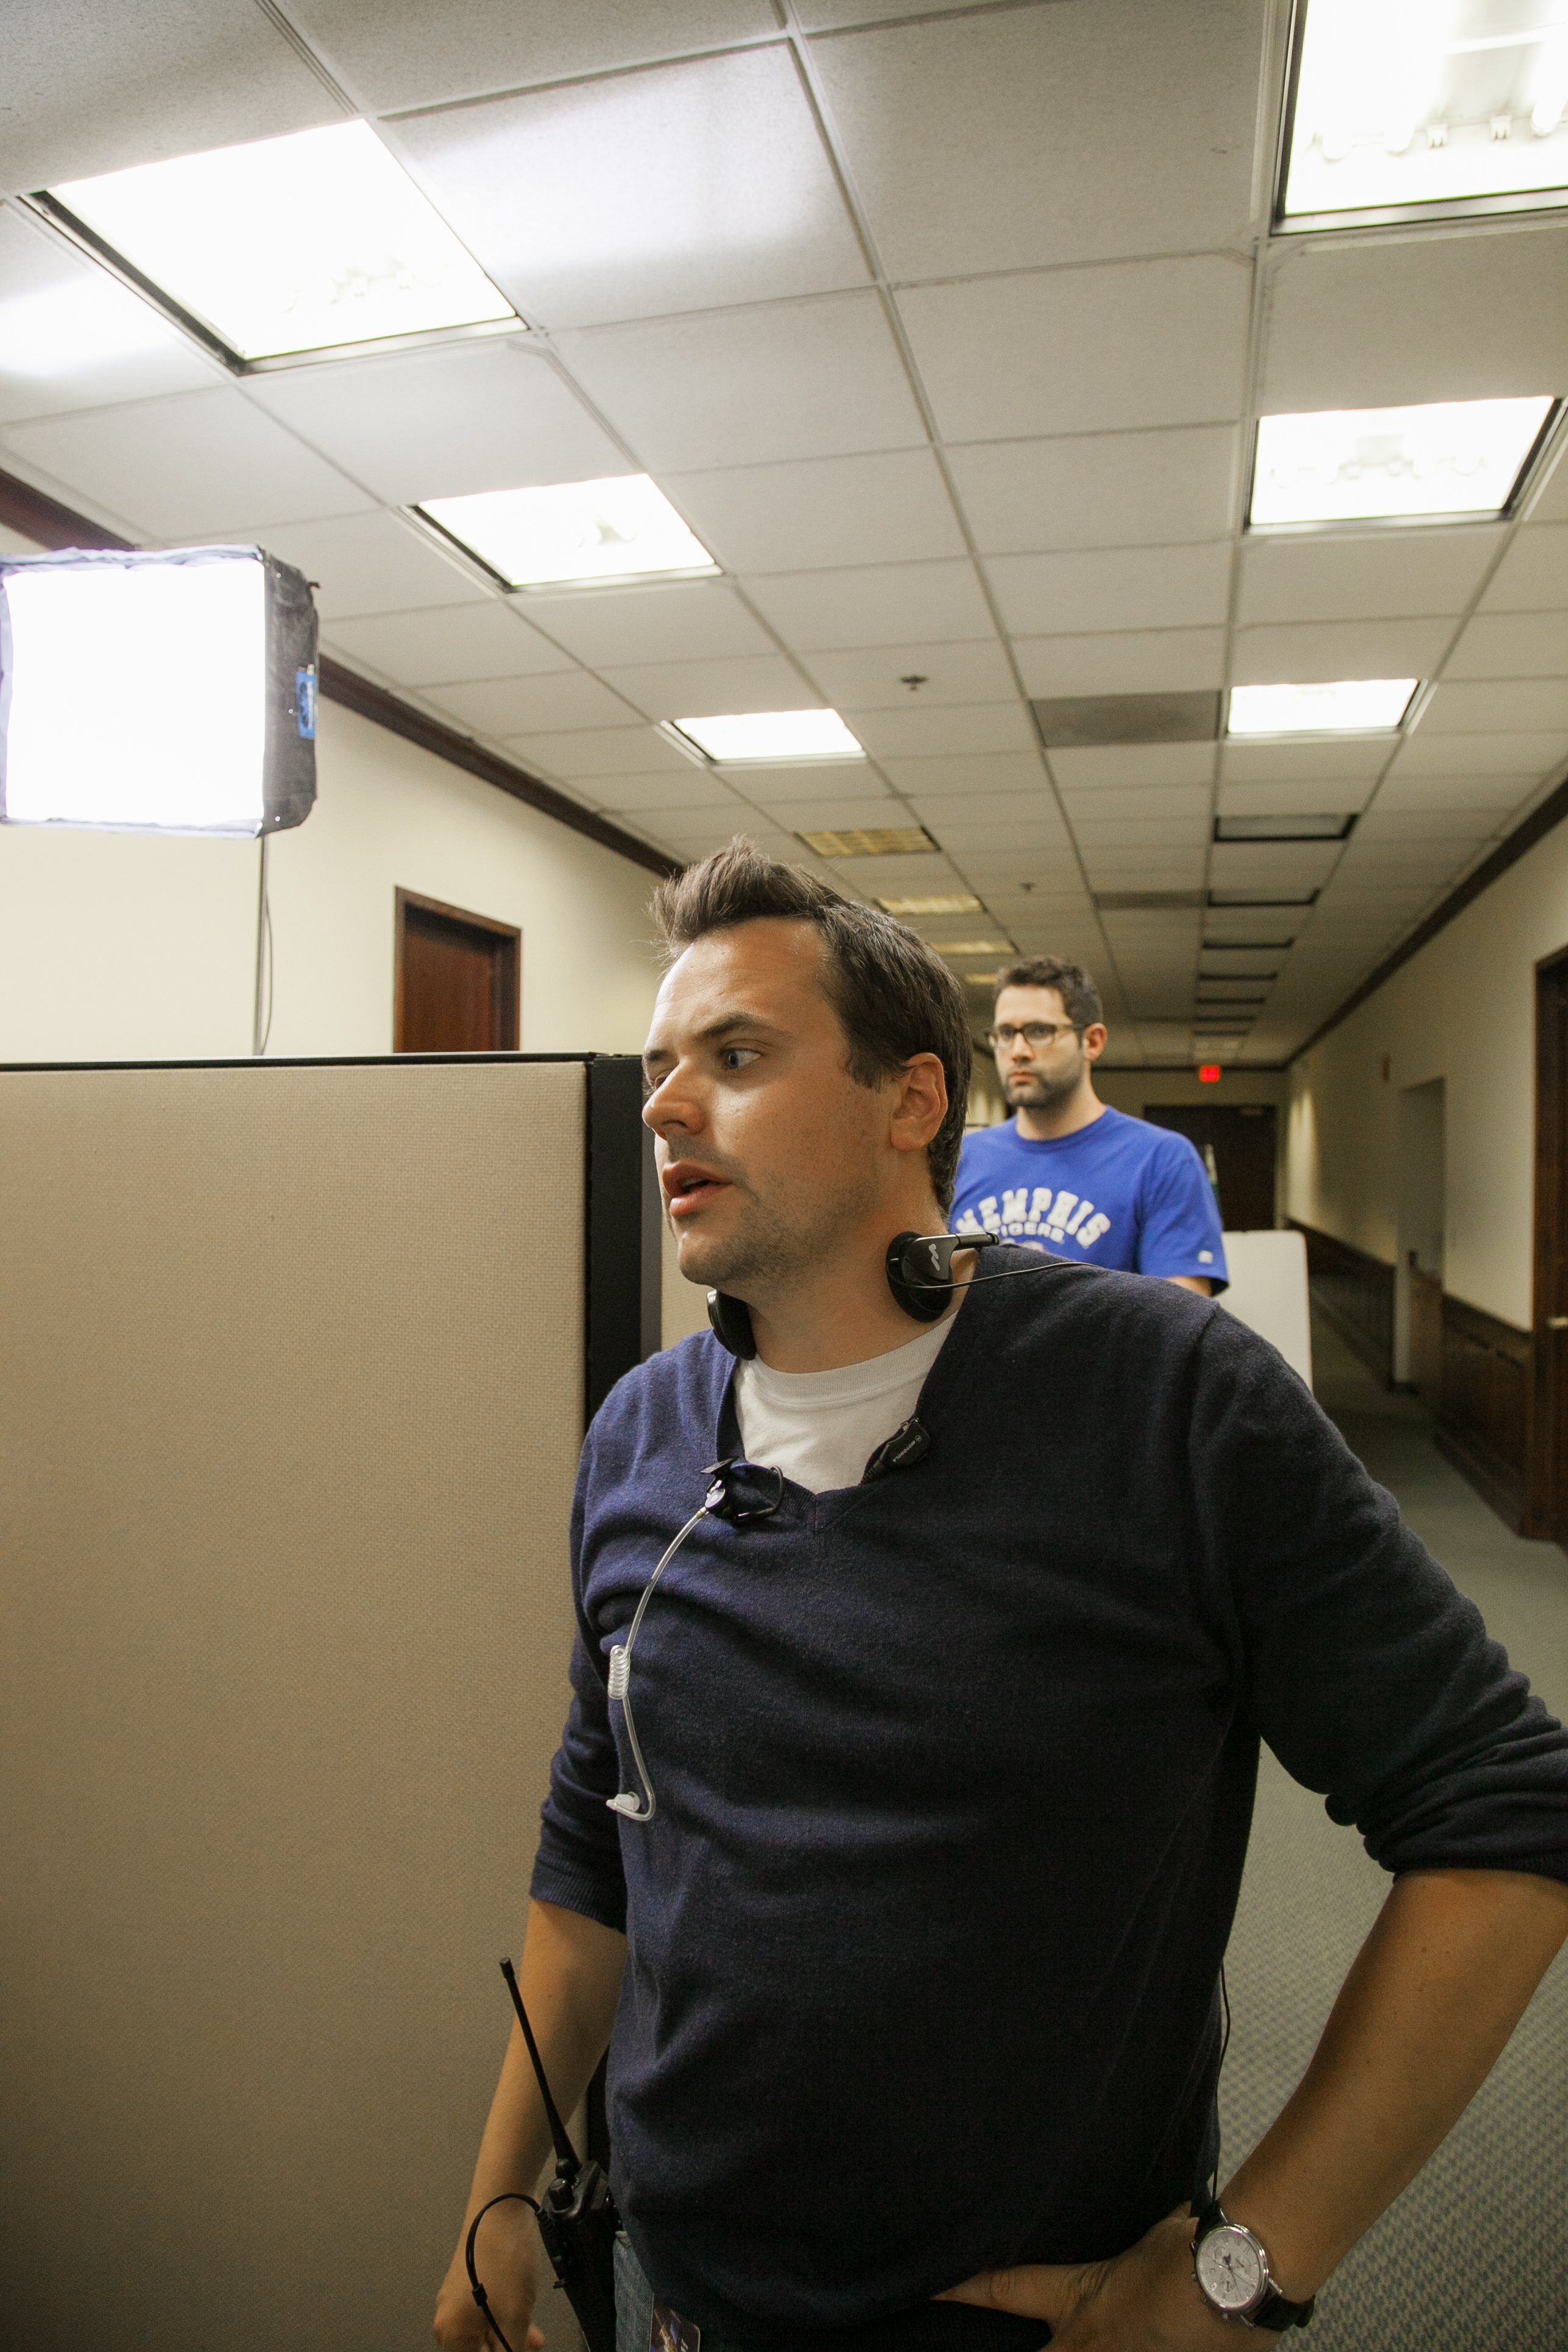 Director Thomas Torrey on the set of Old Henry.